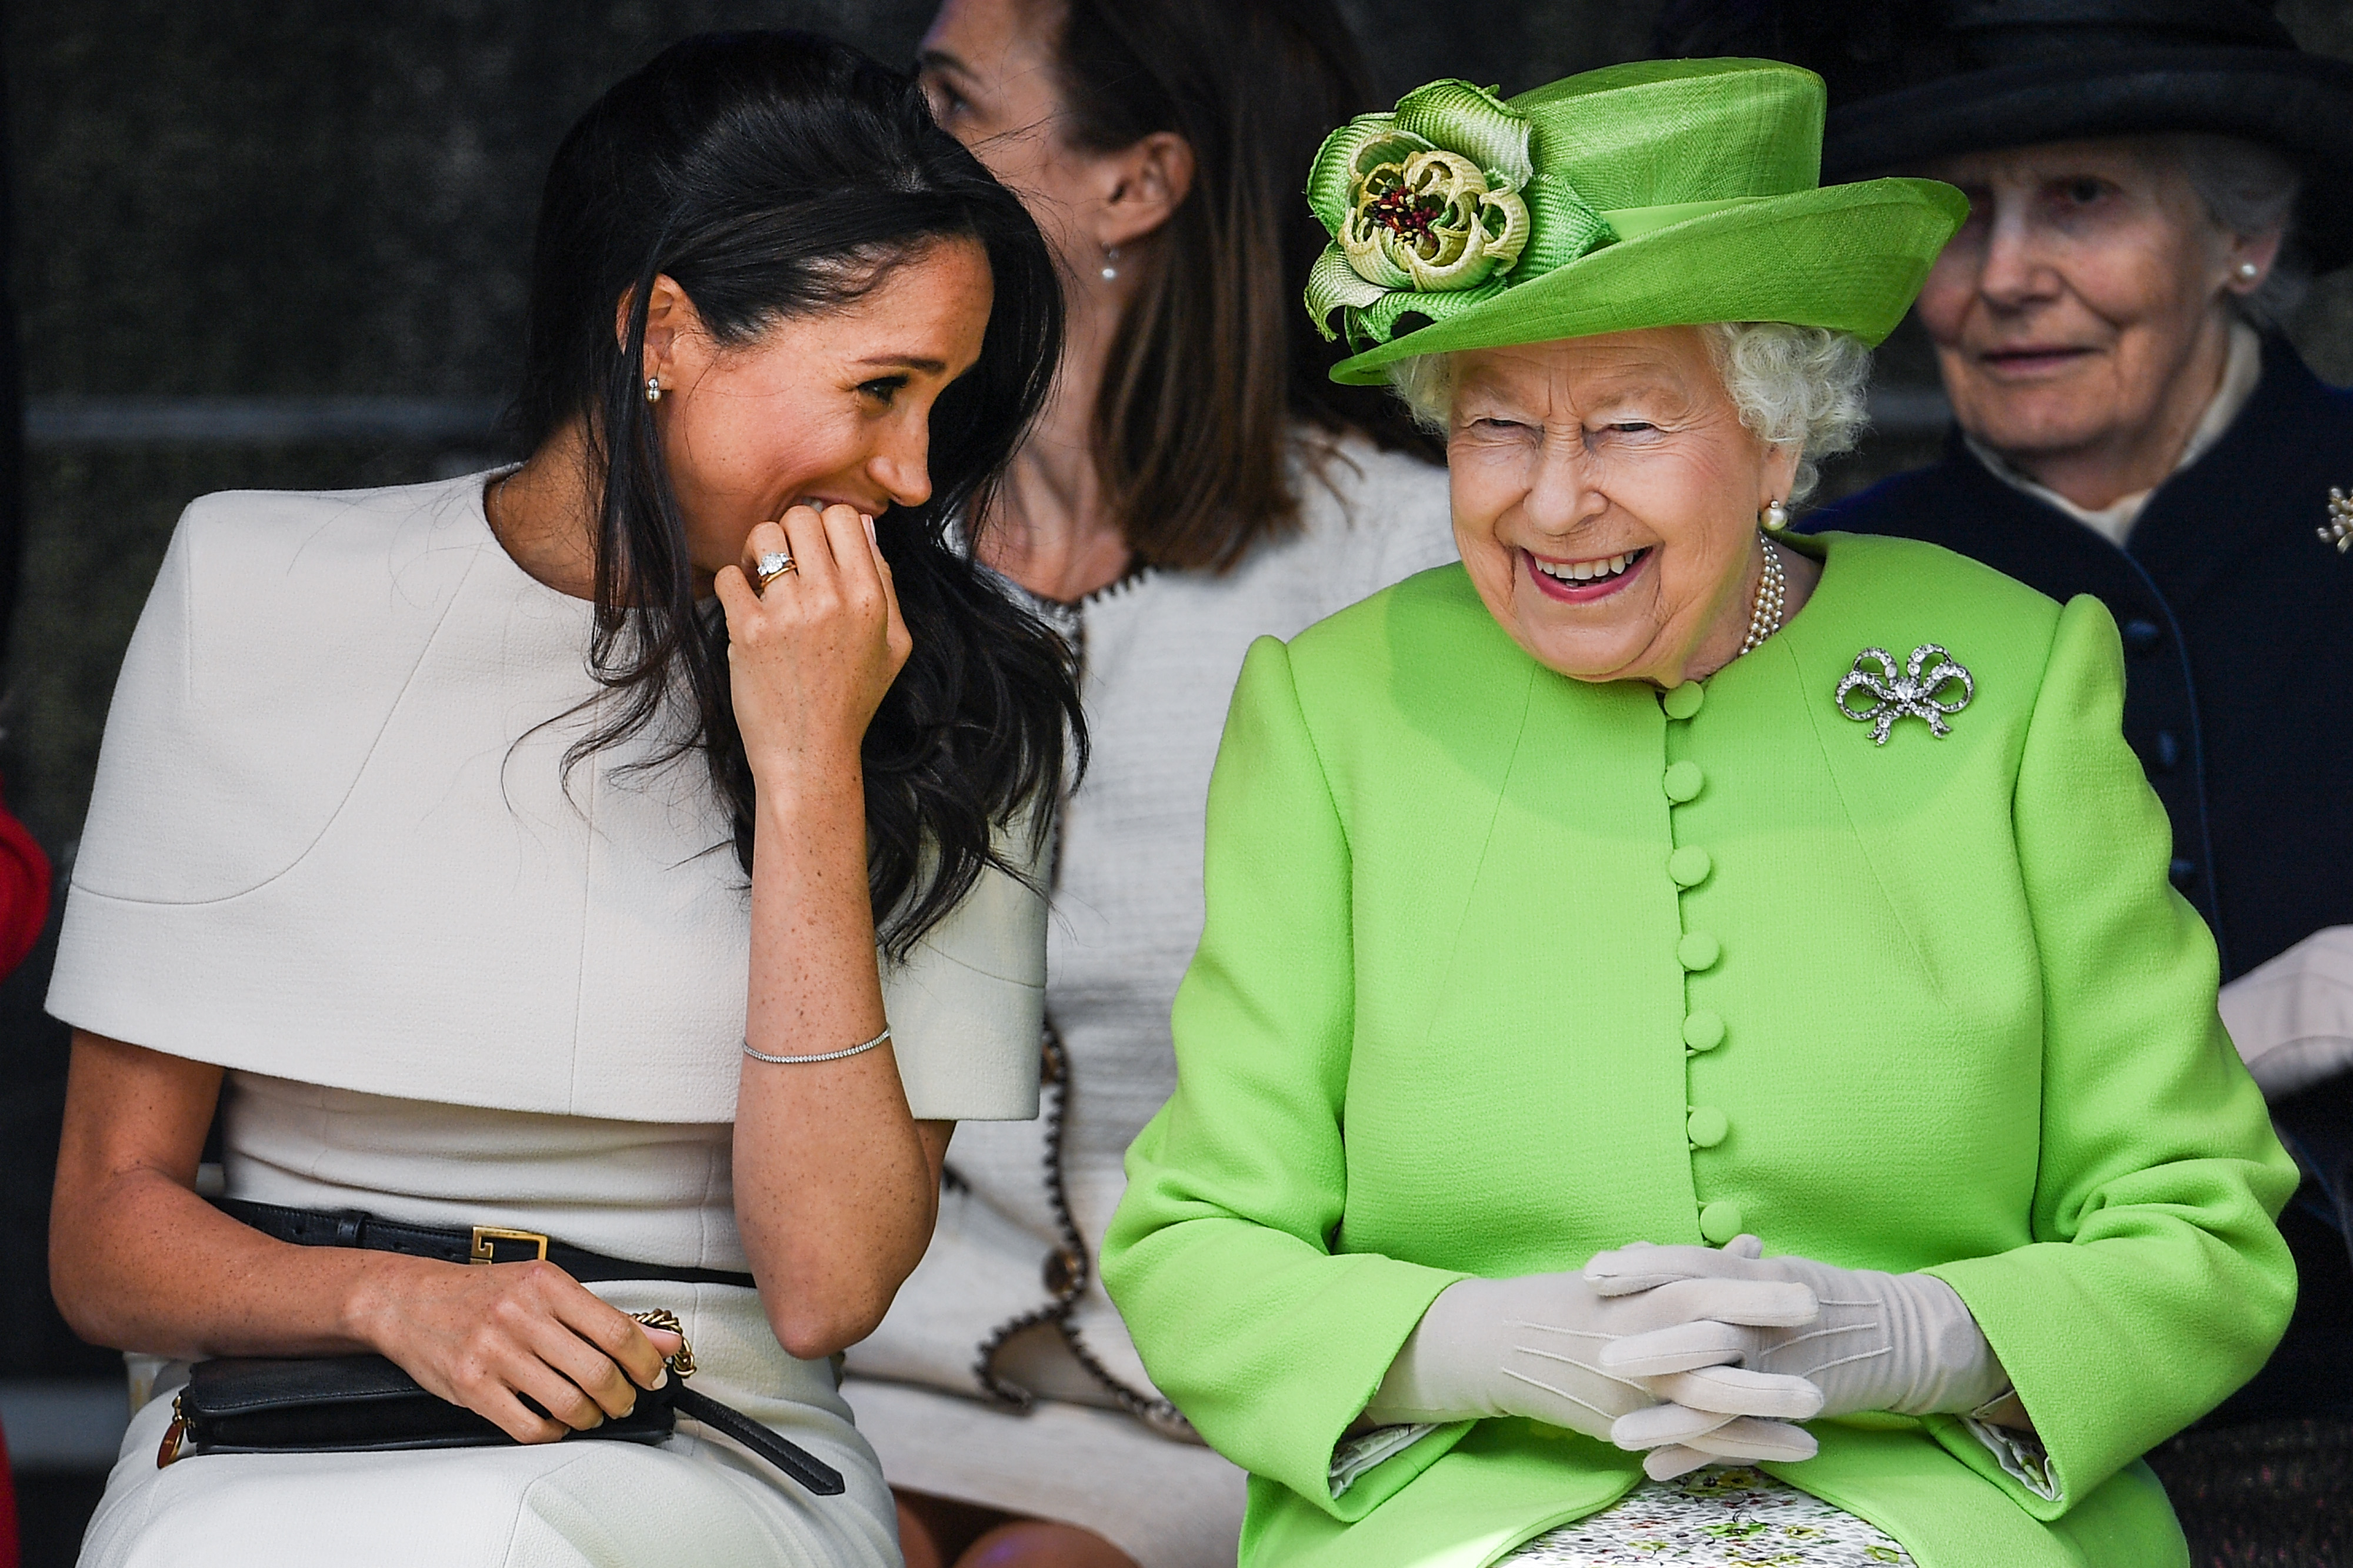 CHESTER, ENGLAND - JUNE 14: Queen Elizabeth II sitts and laughs with Meghan, Duchess of Sussex during a ceremony to open the new Mersey Gateway Bridge on June 14, 2018 in the town of Widnes in Halton, Cheshire, England. Meghan Markle married Prince Harry last month to become The Duchess of Sussex and this is her first engagement with the Queen. During the visit the pair will open a road bridge in Widnes and visit The Storyhouse and Town Hall in Chester.